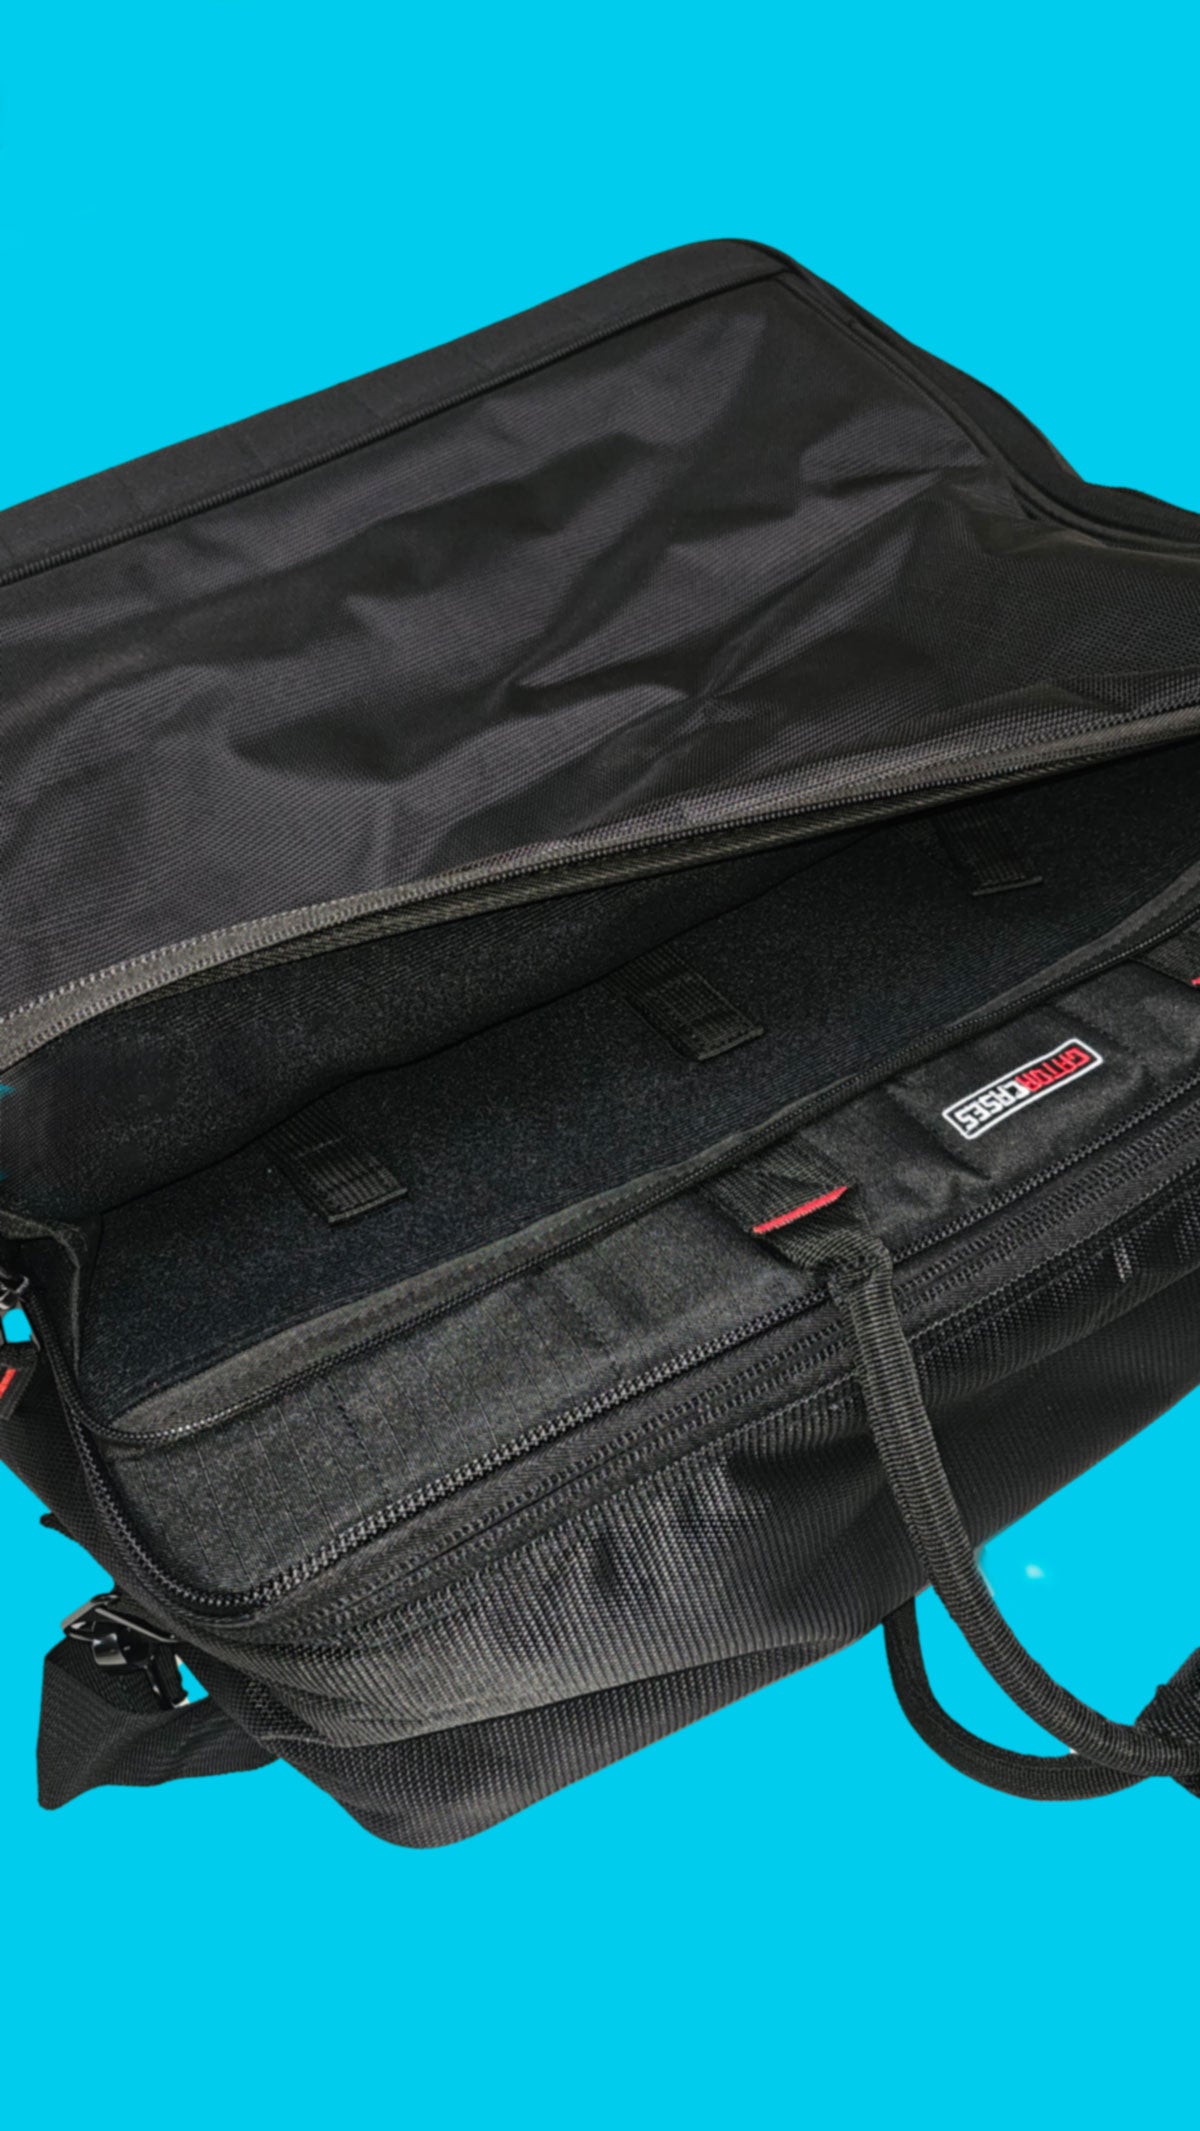 Pockets on the outside of the Juvent micro-impact platform carrying bag.